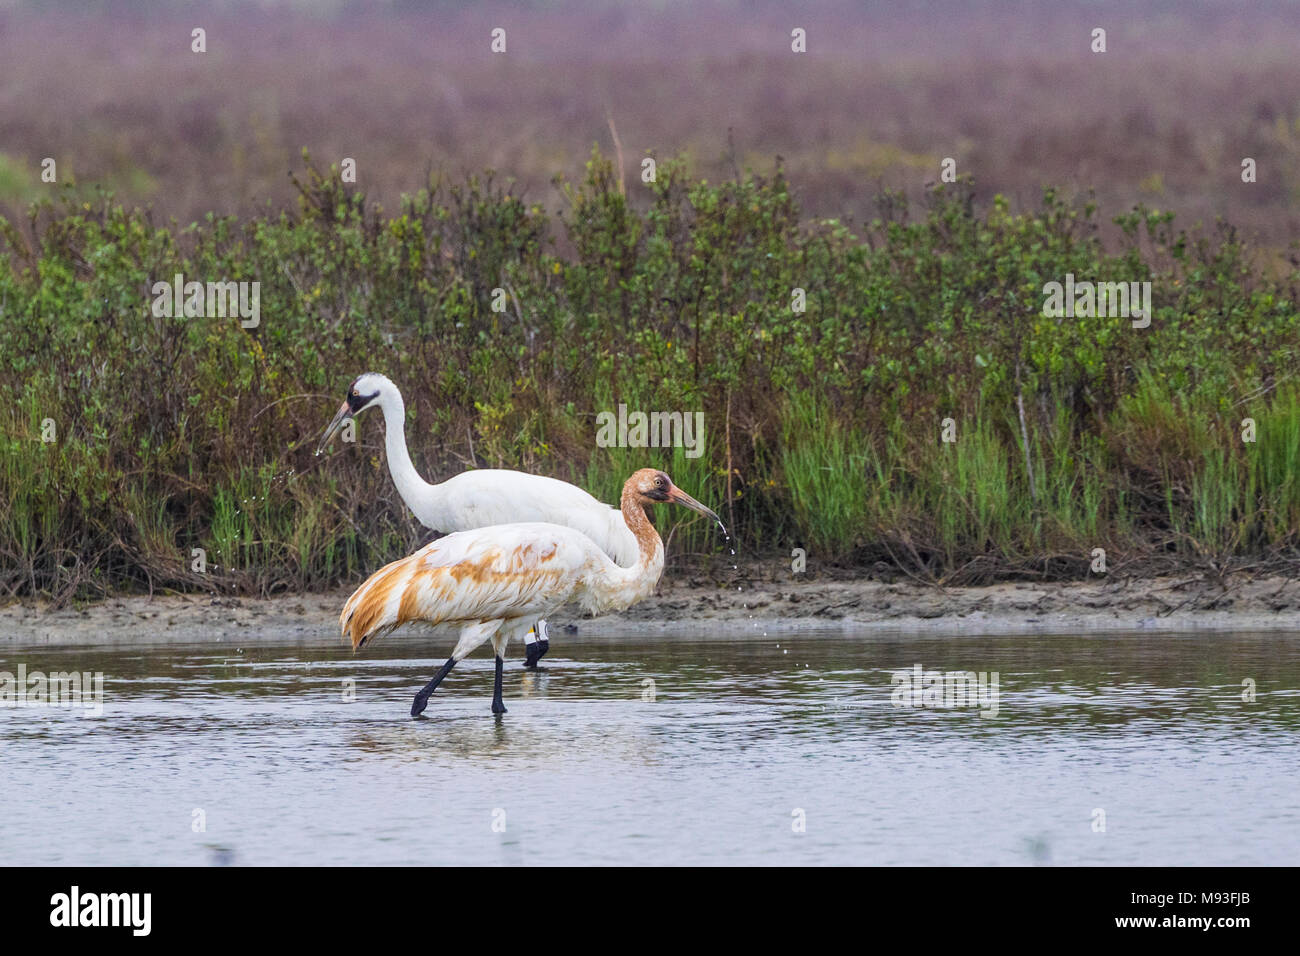 Whooping Cranes in Aransas National Wildlife Refuge on a misty, foggy morning Stock Photo